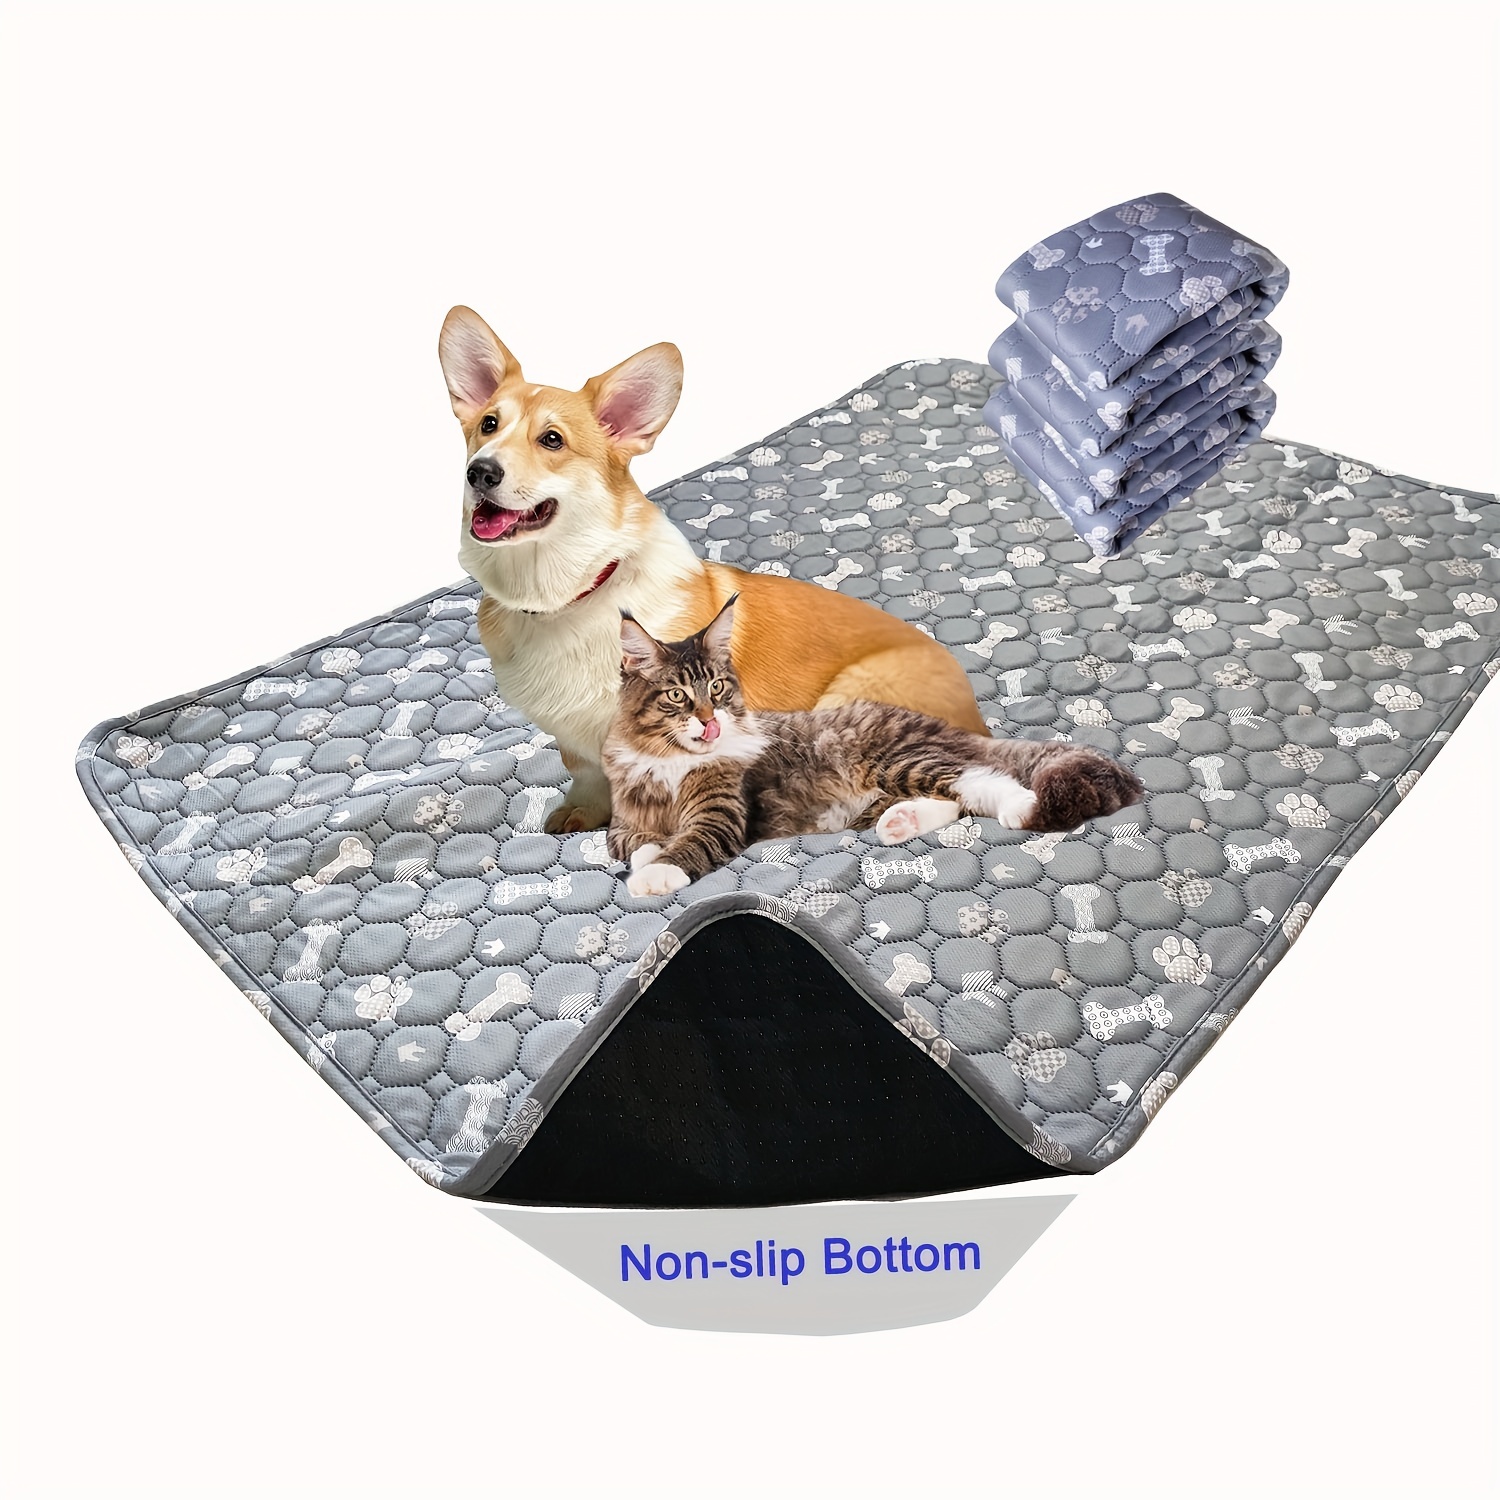 Washable Pee Pads For Dogs, Reusable Dog Training Pads, Non-slip Waterproof Dog  Pee Pads, Puppy Training Pads, Whelping Pads For Dogs, Cats